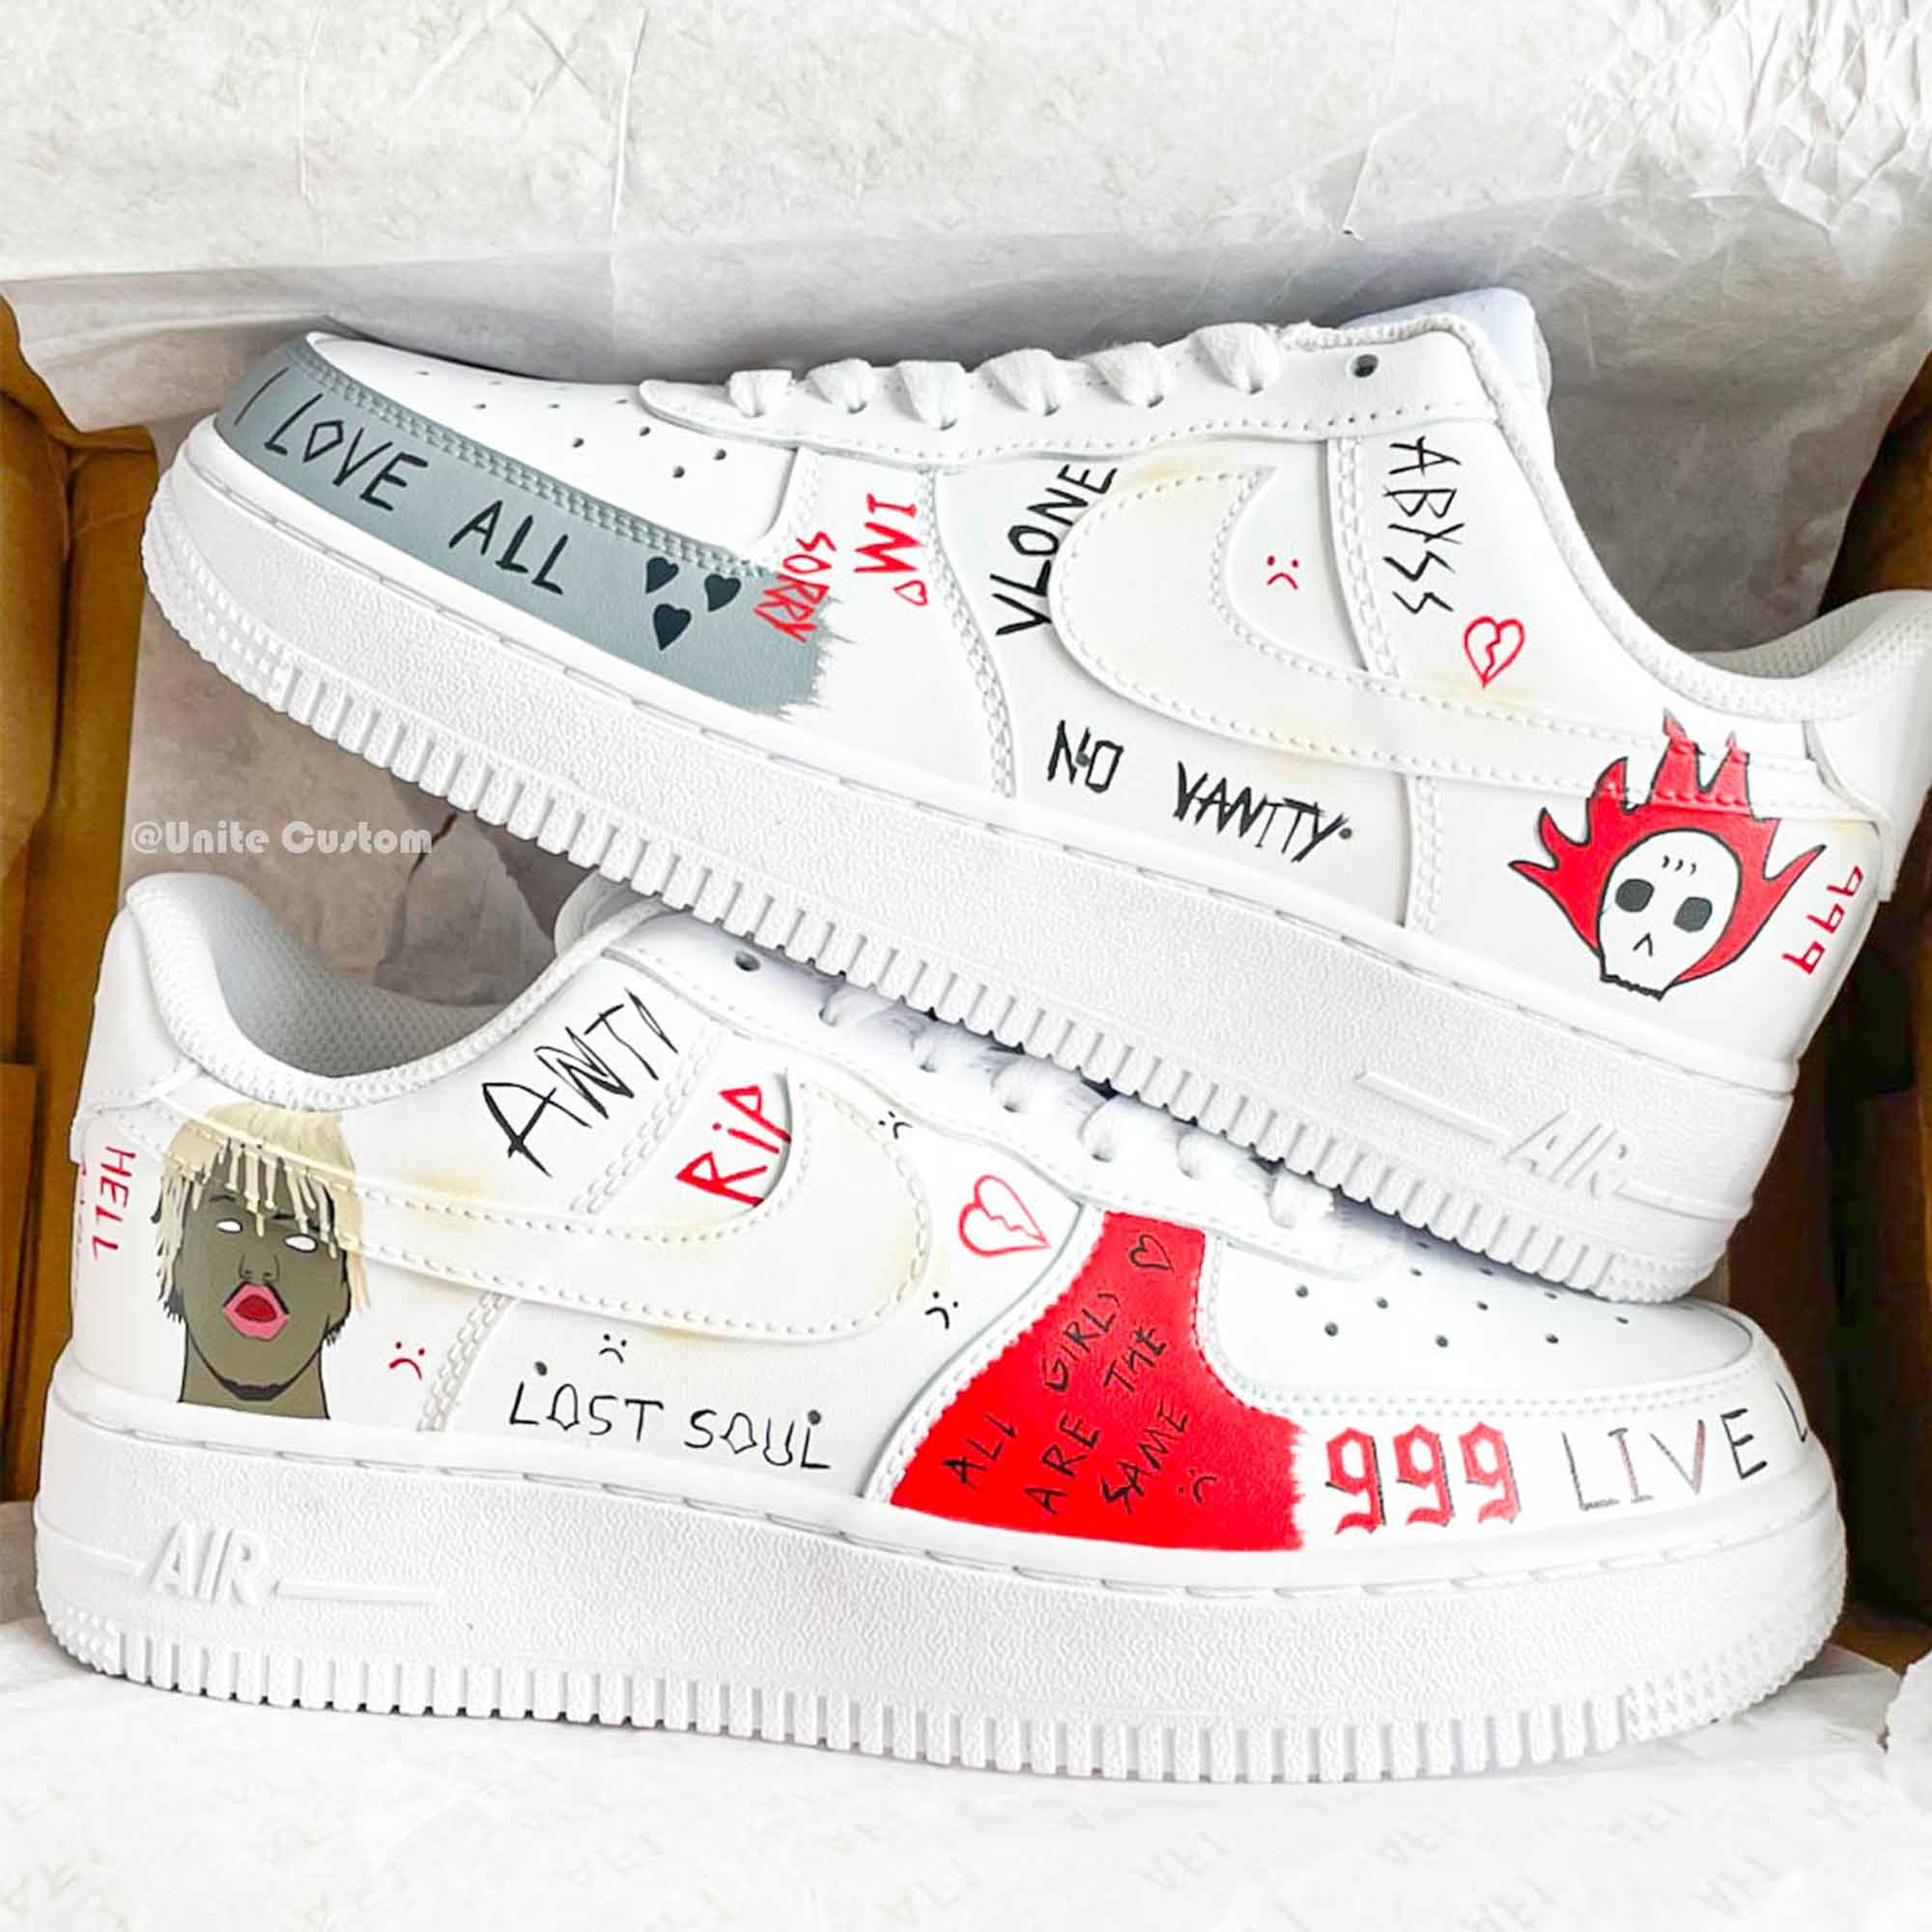 customized cool air force 1